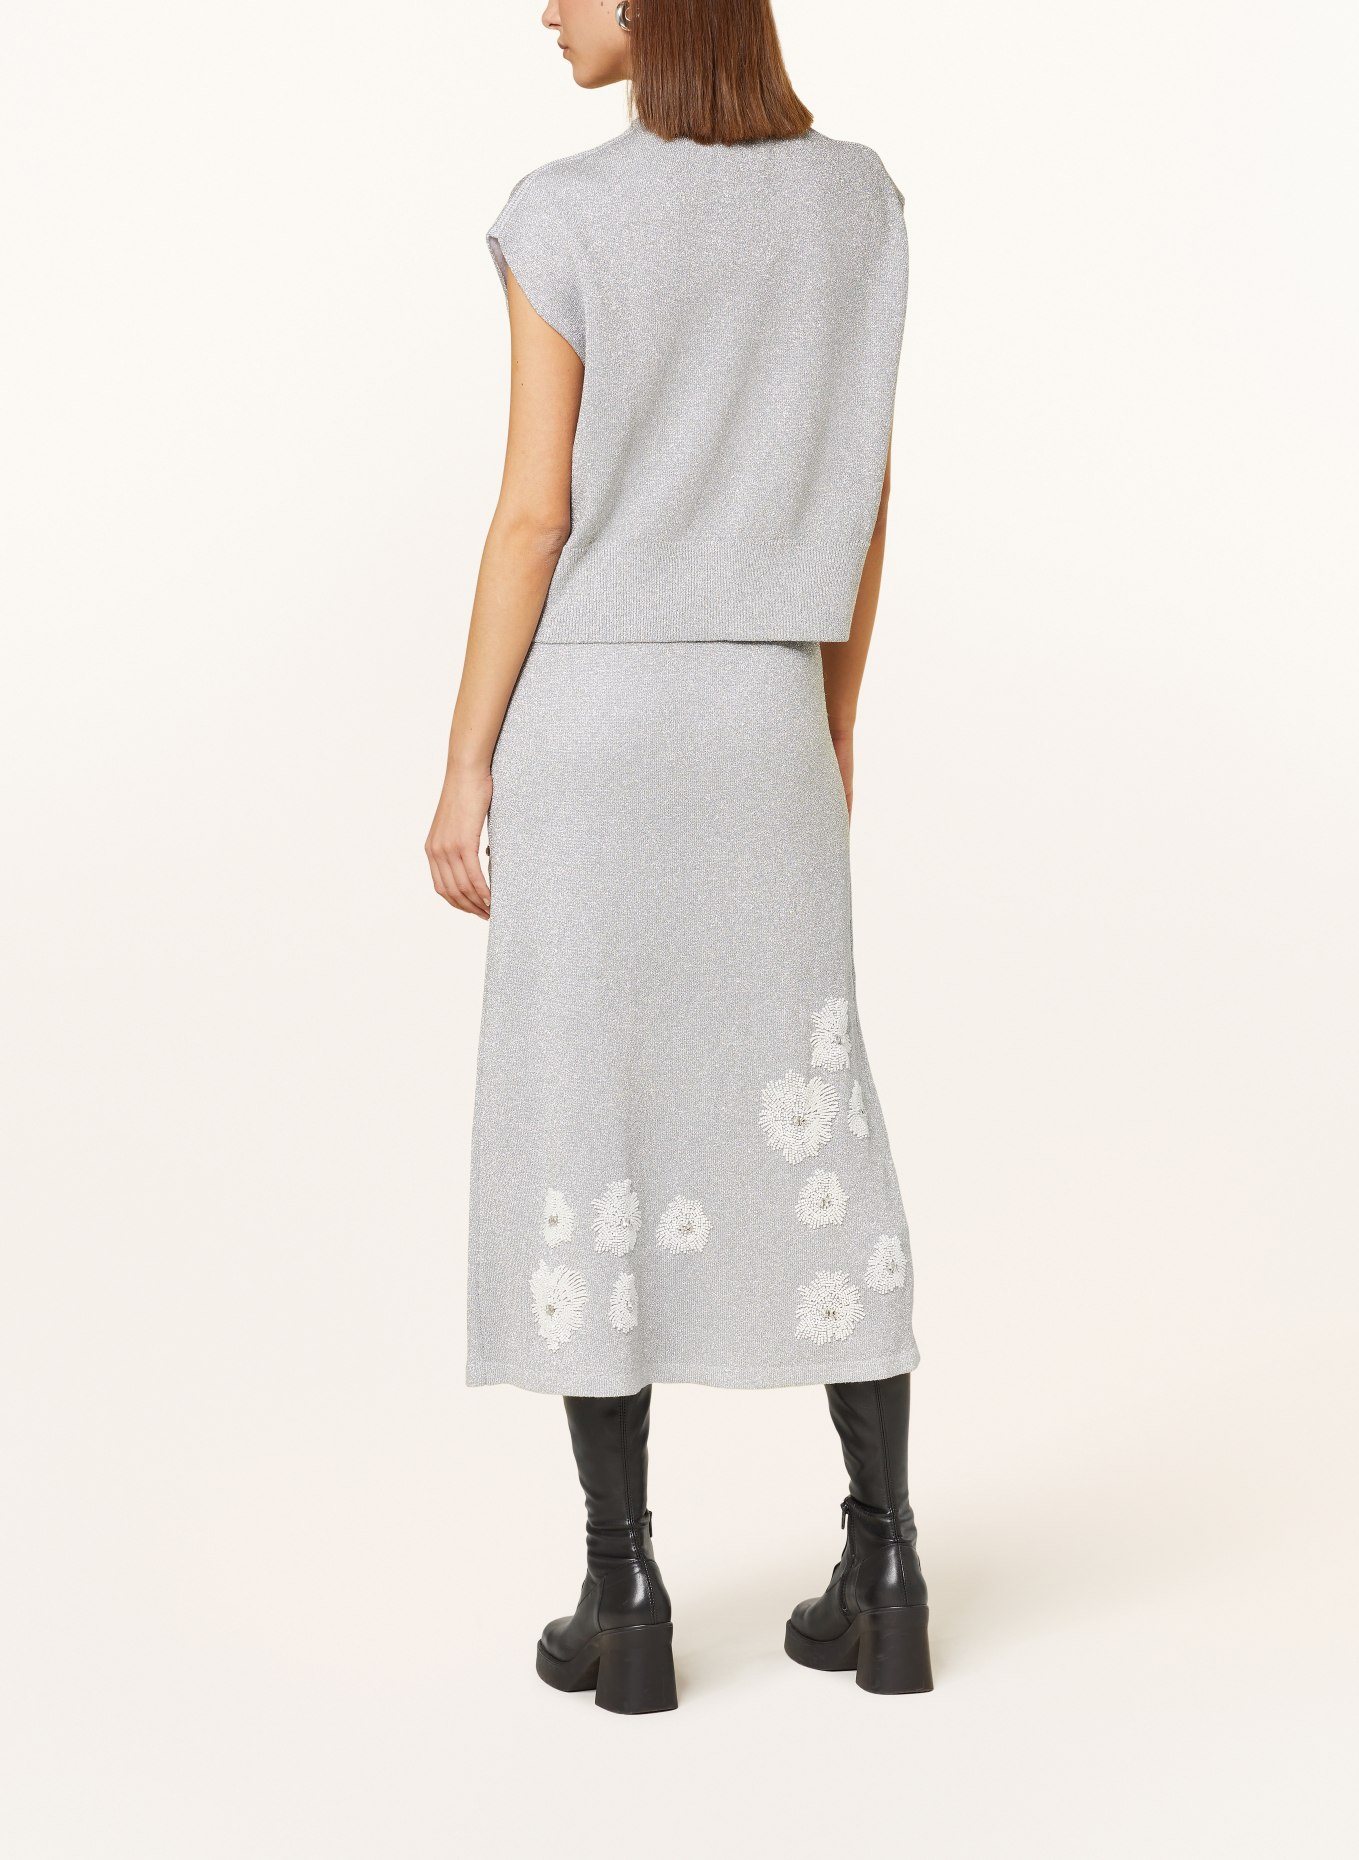 ESSENTIEL ANTWERP Knit top ERUBY with glitter thread and decorative gems, Color: SILVER/ WHITE (Image 3)